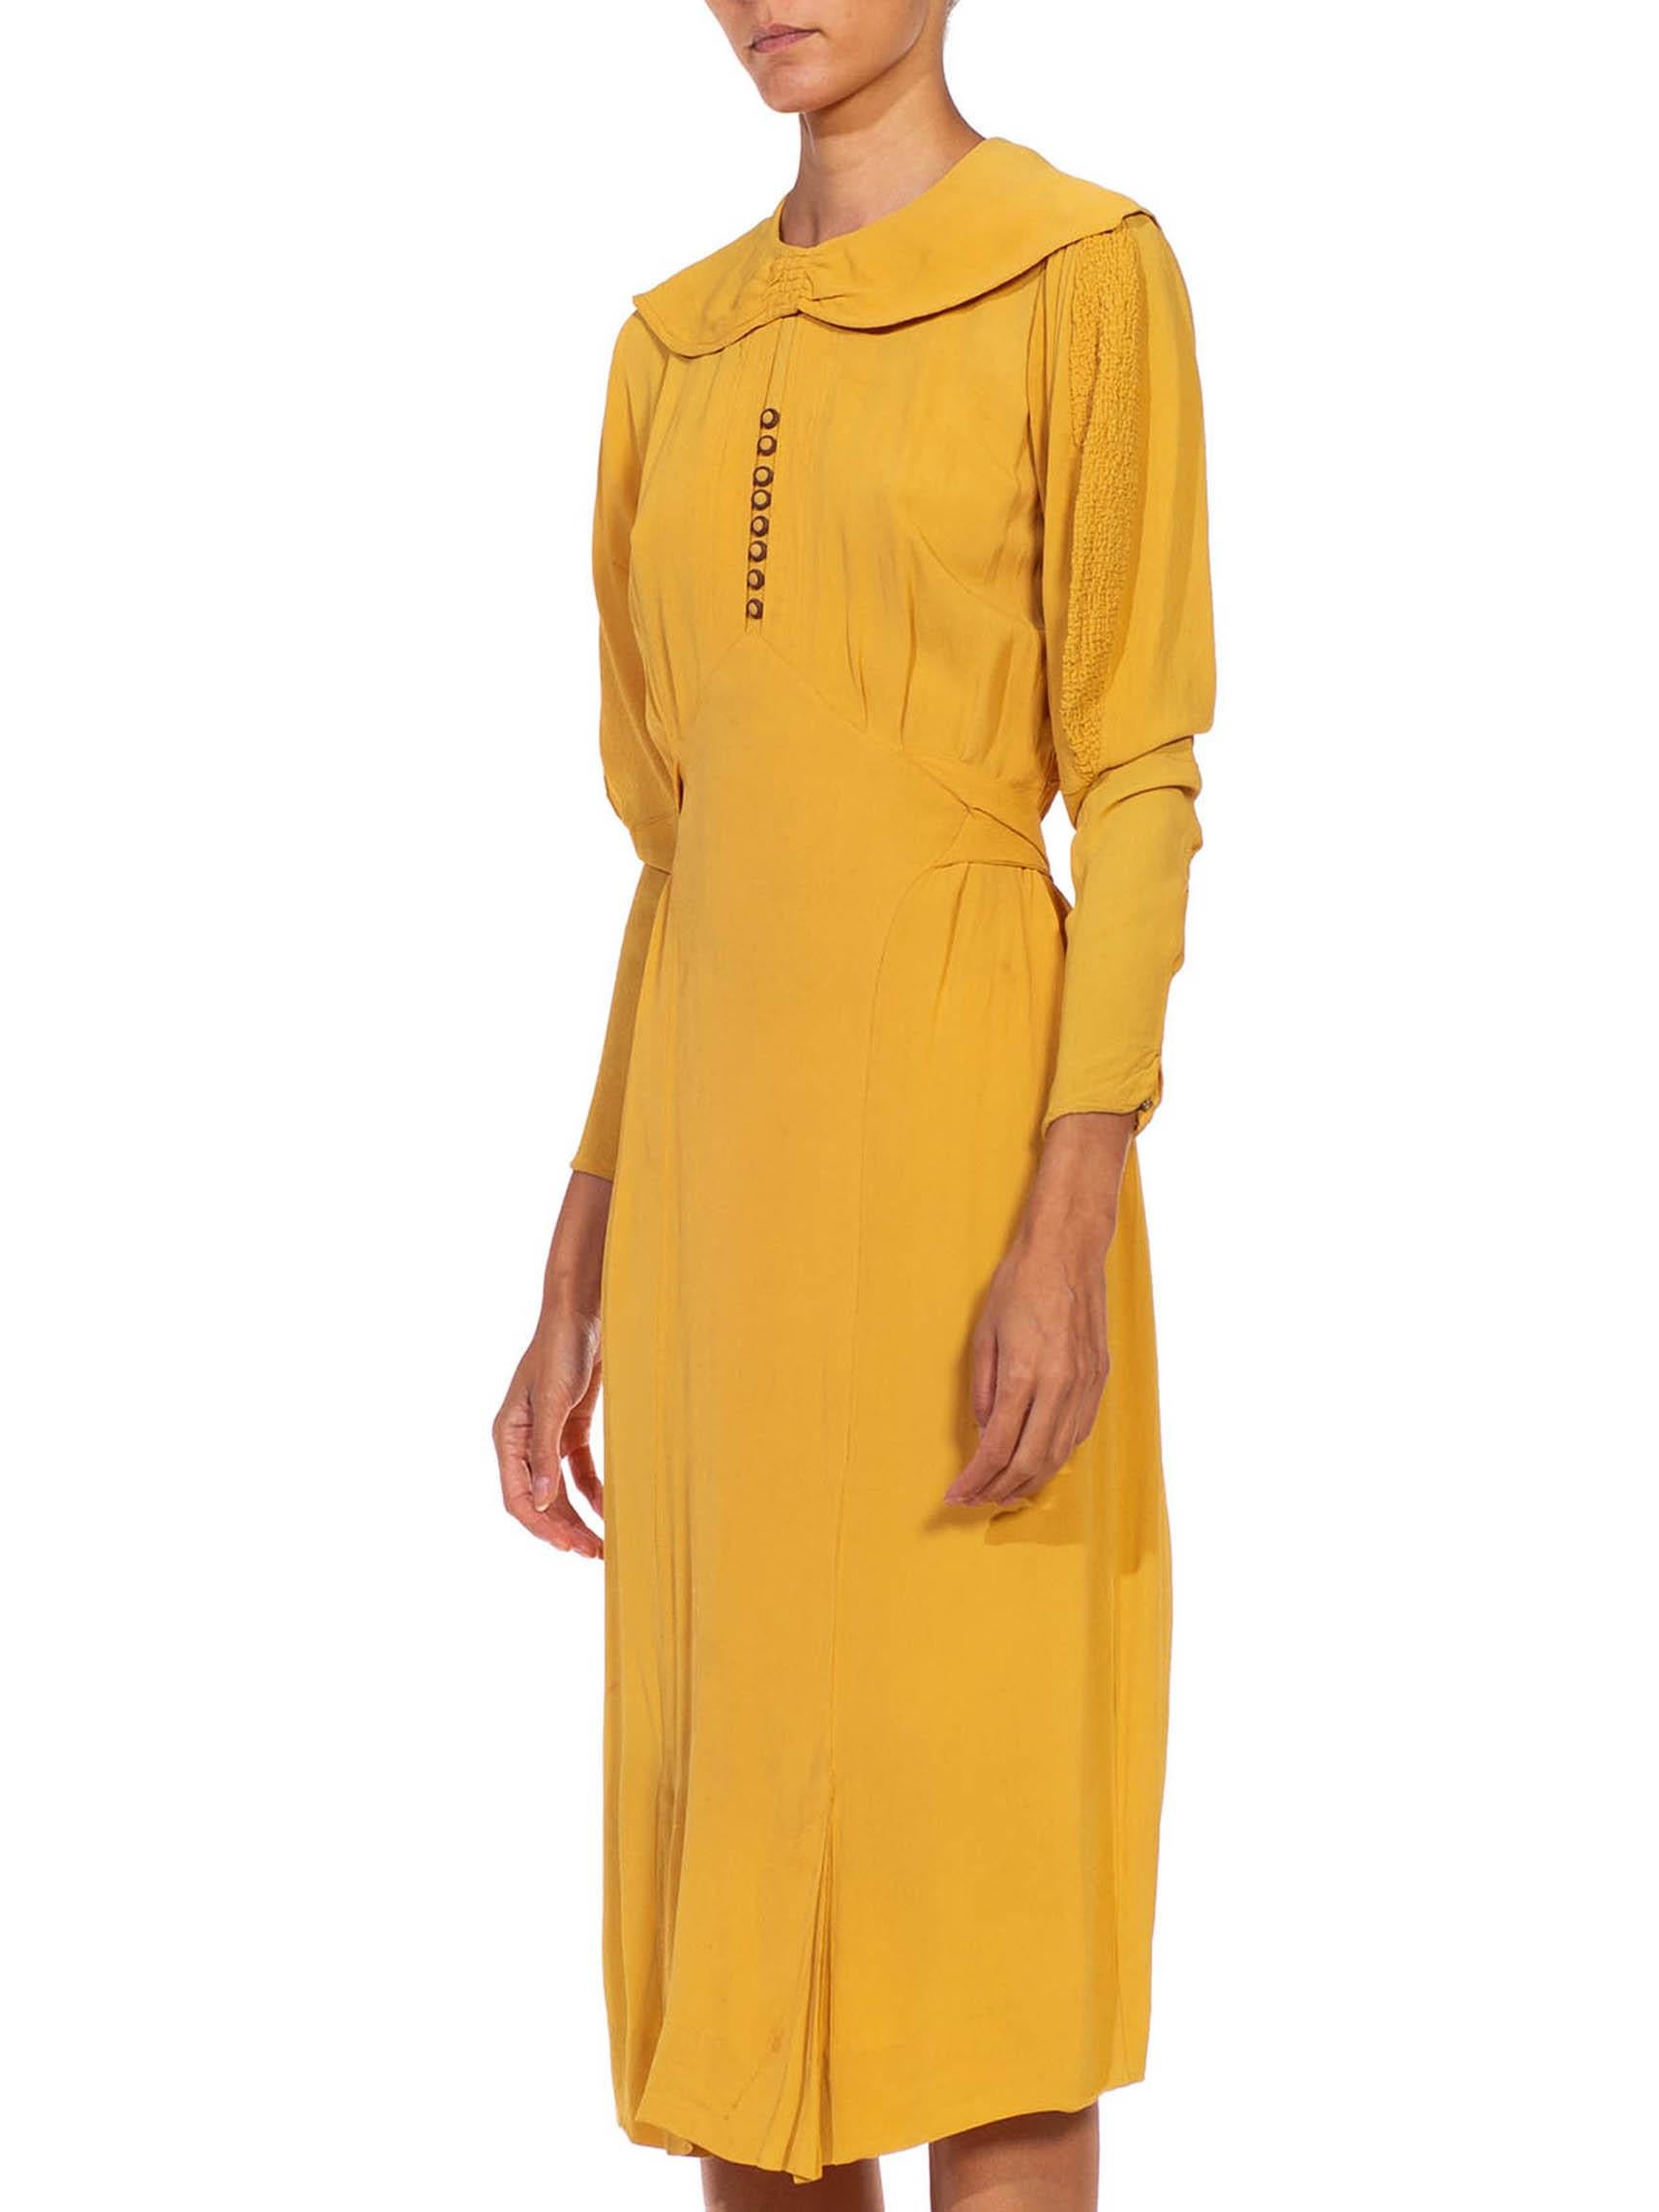 1930S Mustard Yellow Rayon Crepe Caplet Dress With Leg O Mutton Sleeves In Excellent Condition For Sale In New York, NY